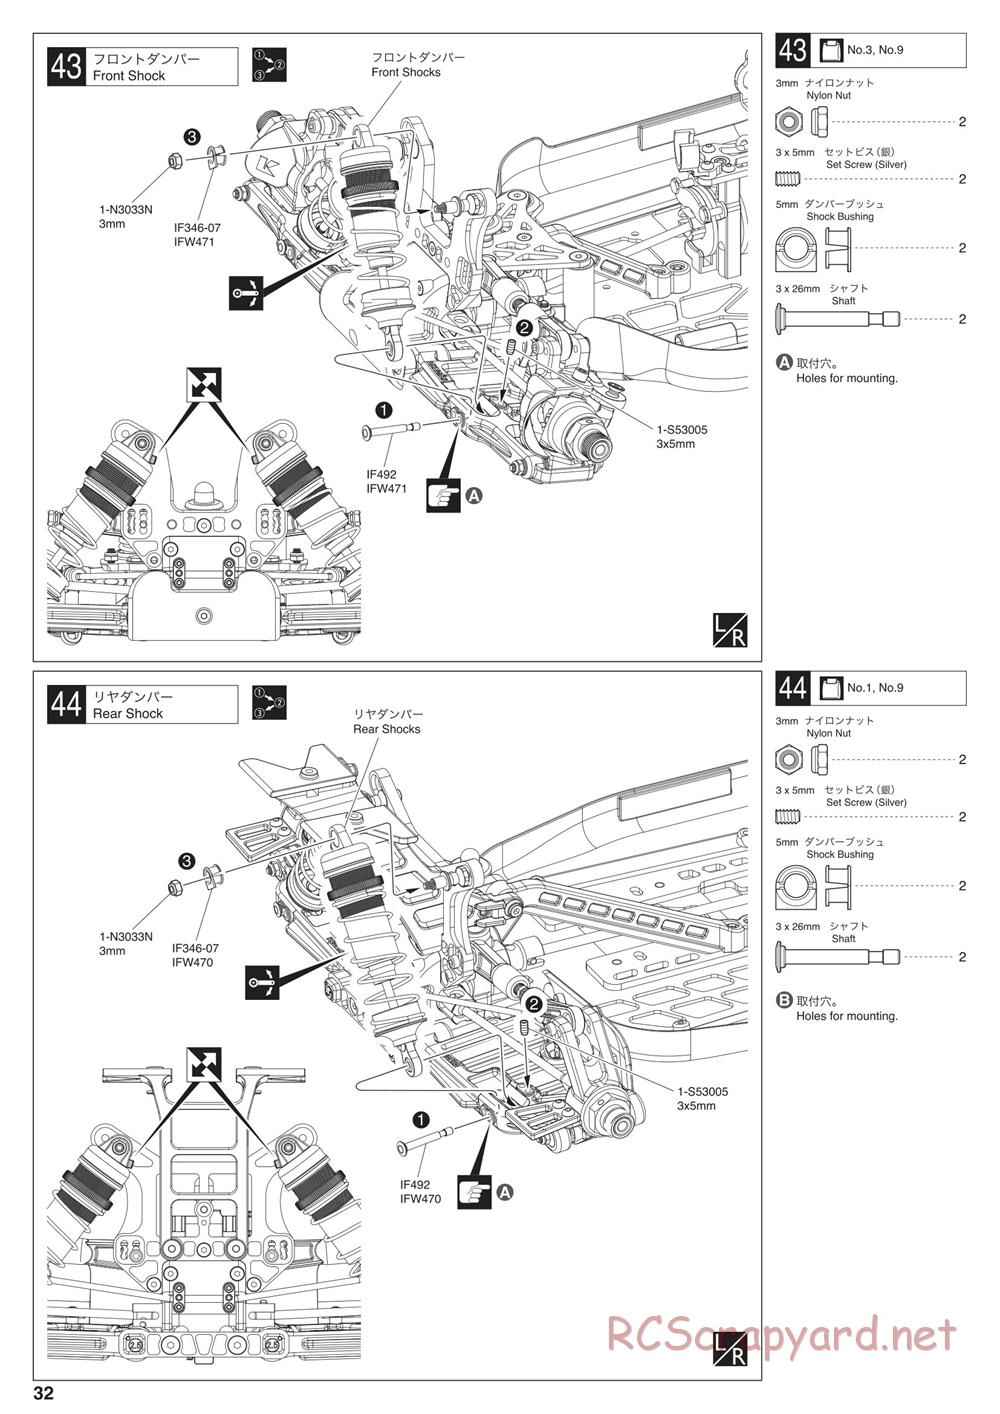 Kyosho - Inferno MP10 - Manual - Page 32